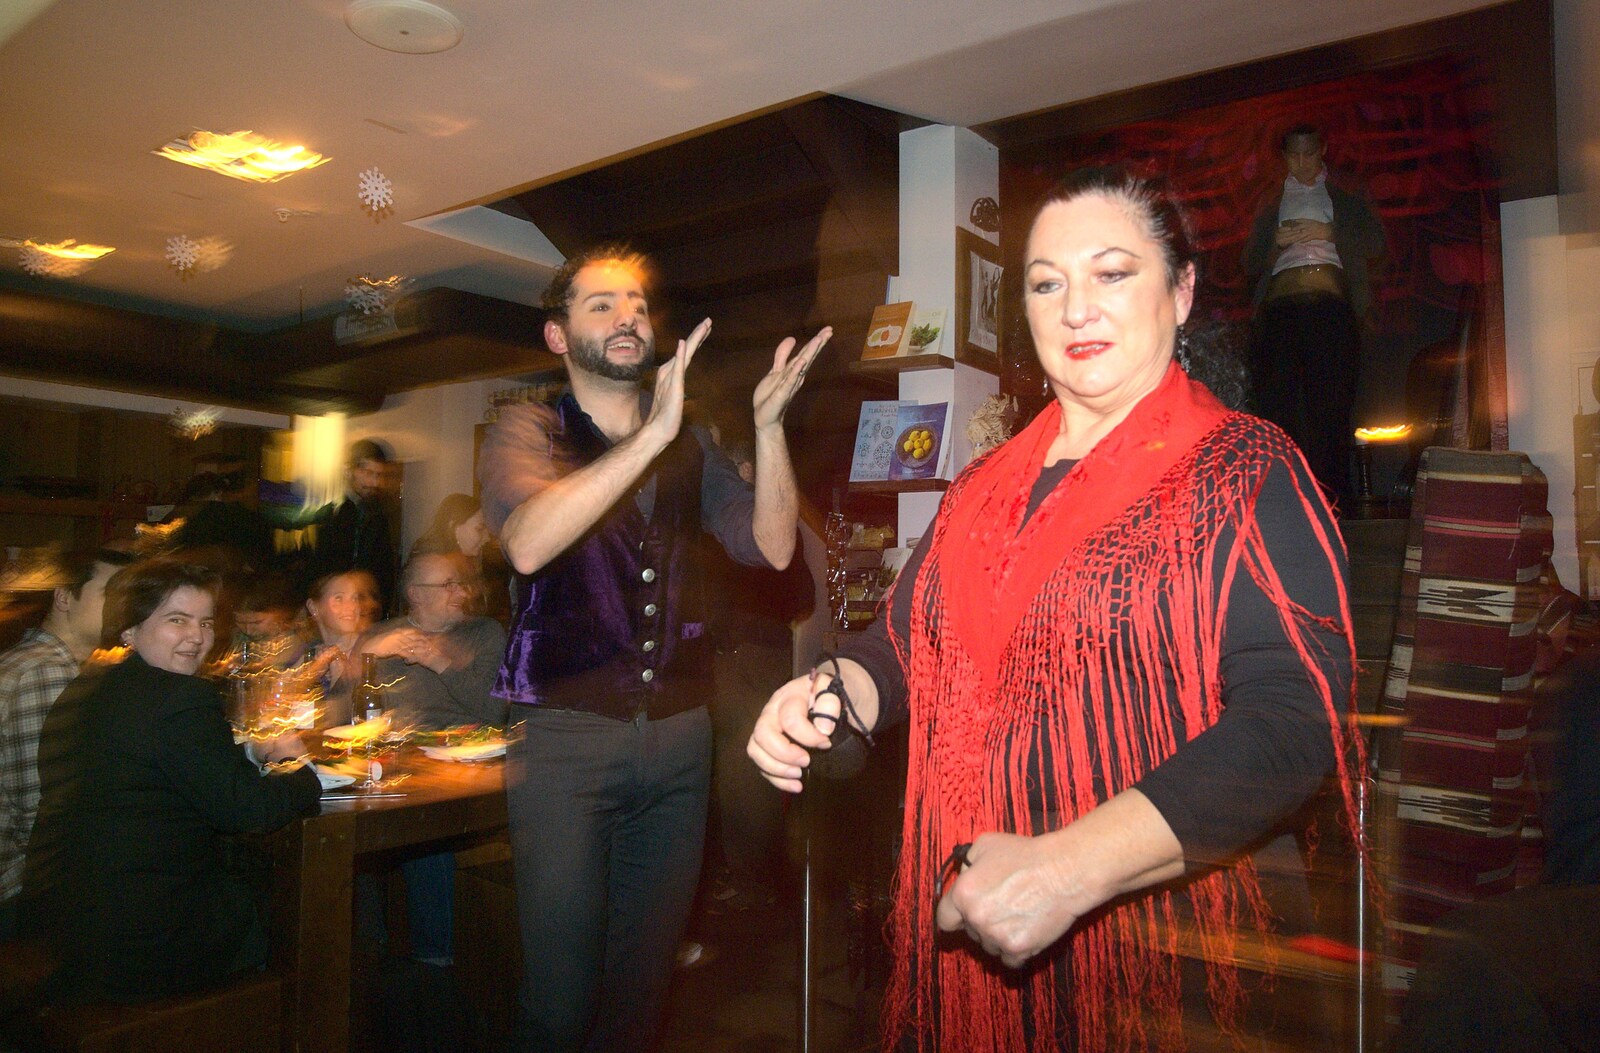 Flamenco dancing in Del Aziz from A TouchType Christmas, Southwark, London - 15th December 2011